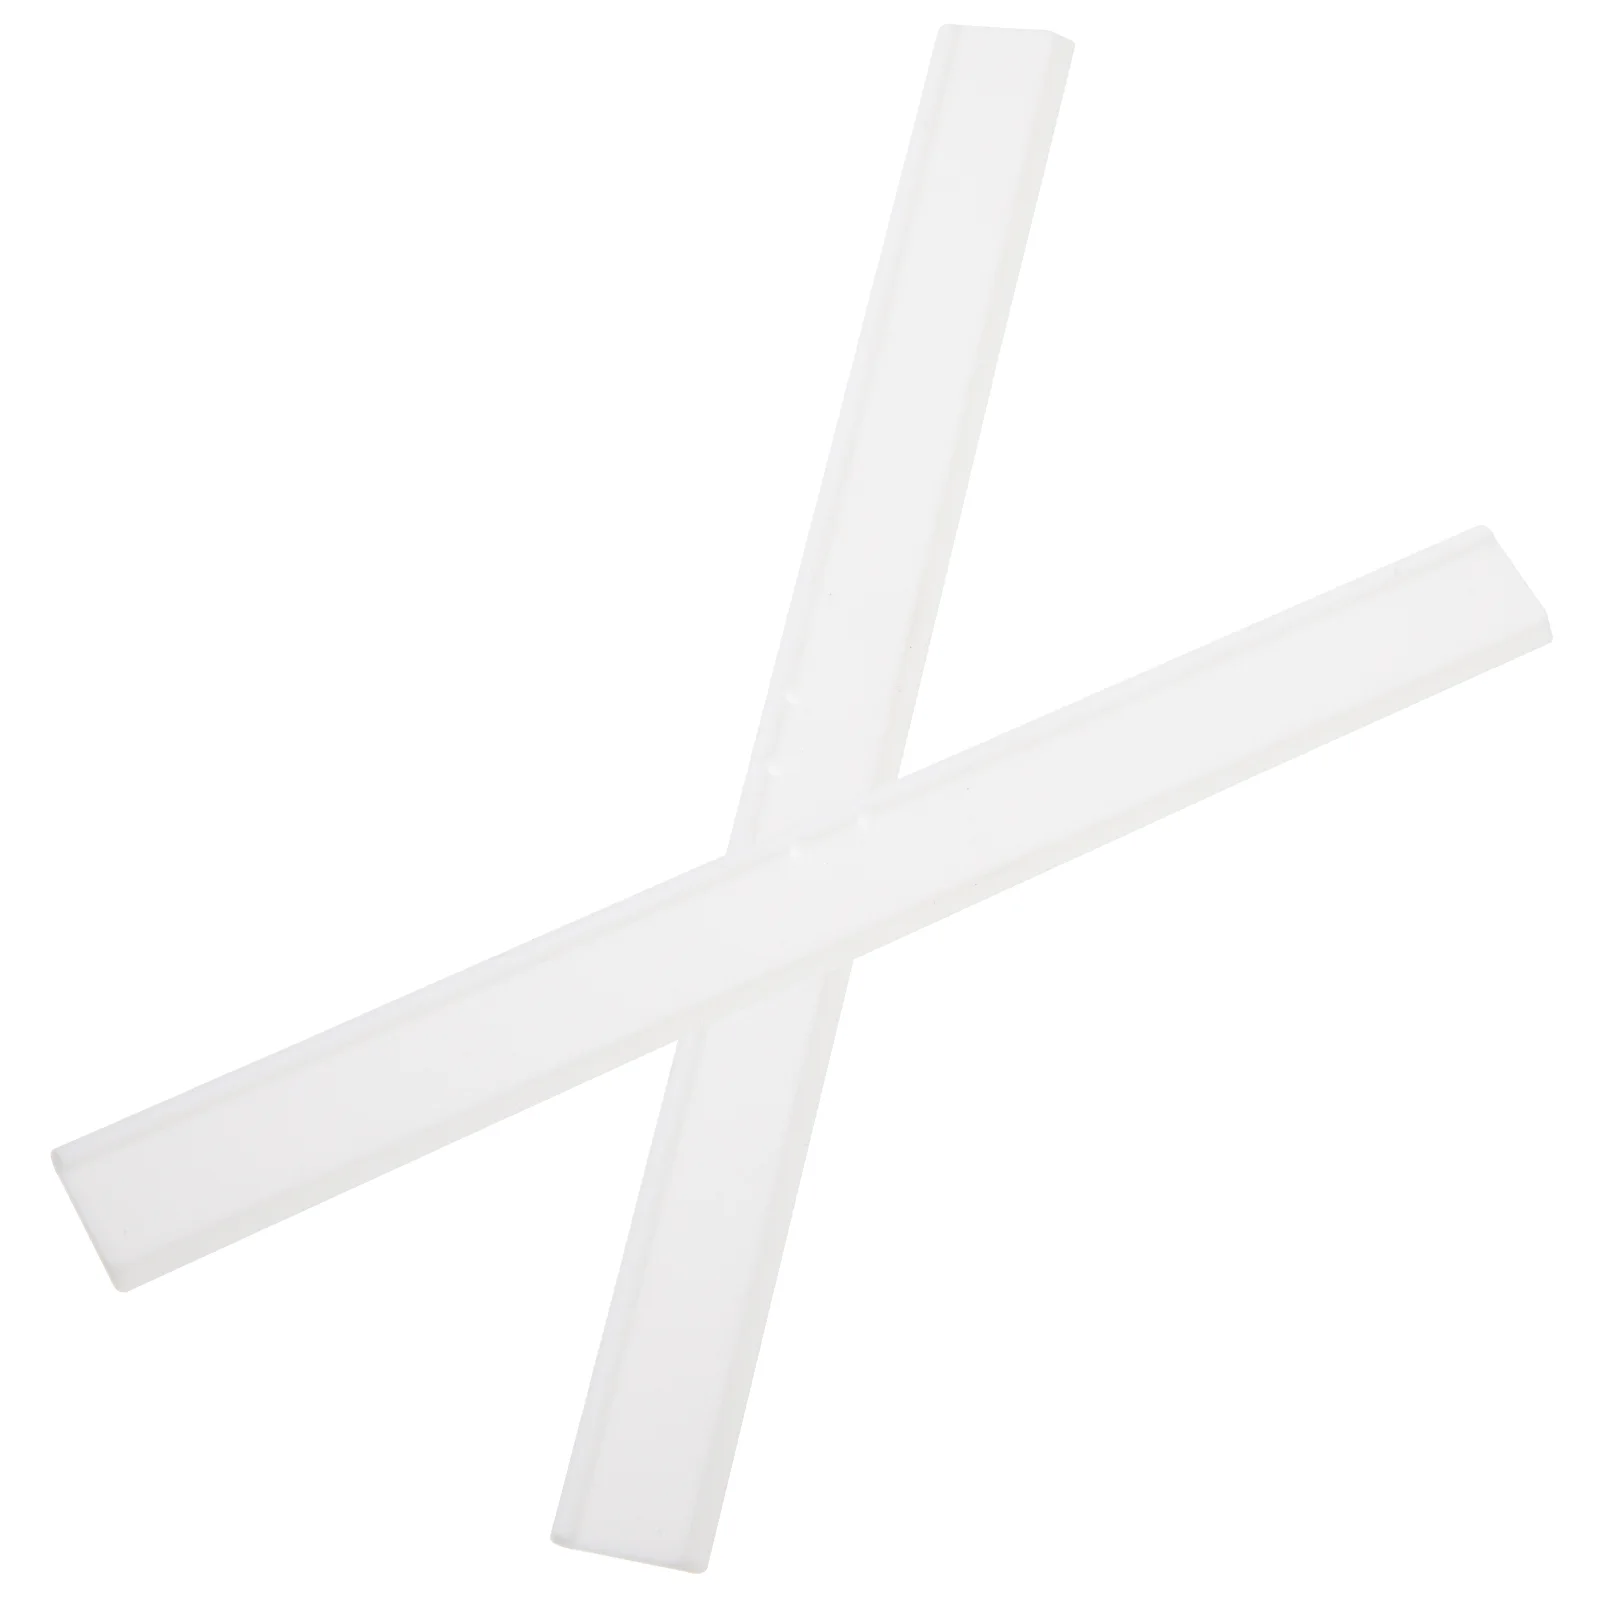 

2 Pcs Spachella Silicone Wiper Strip Window Squeegee Replacement Blades Scraper Refill Rubber White Rubbers Cleaning